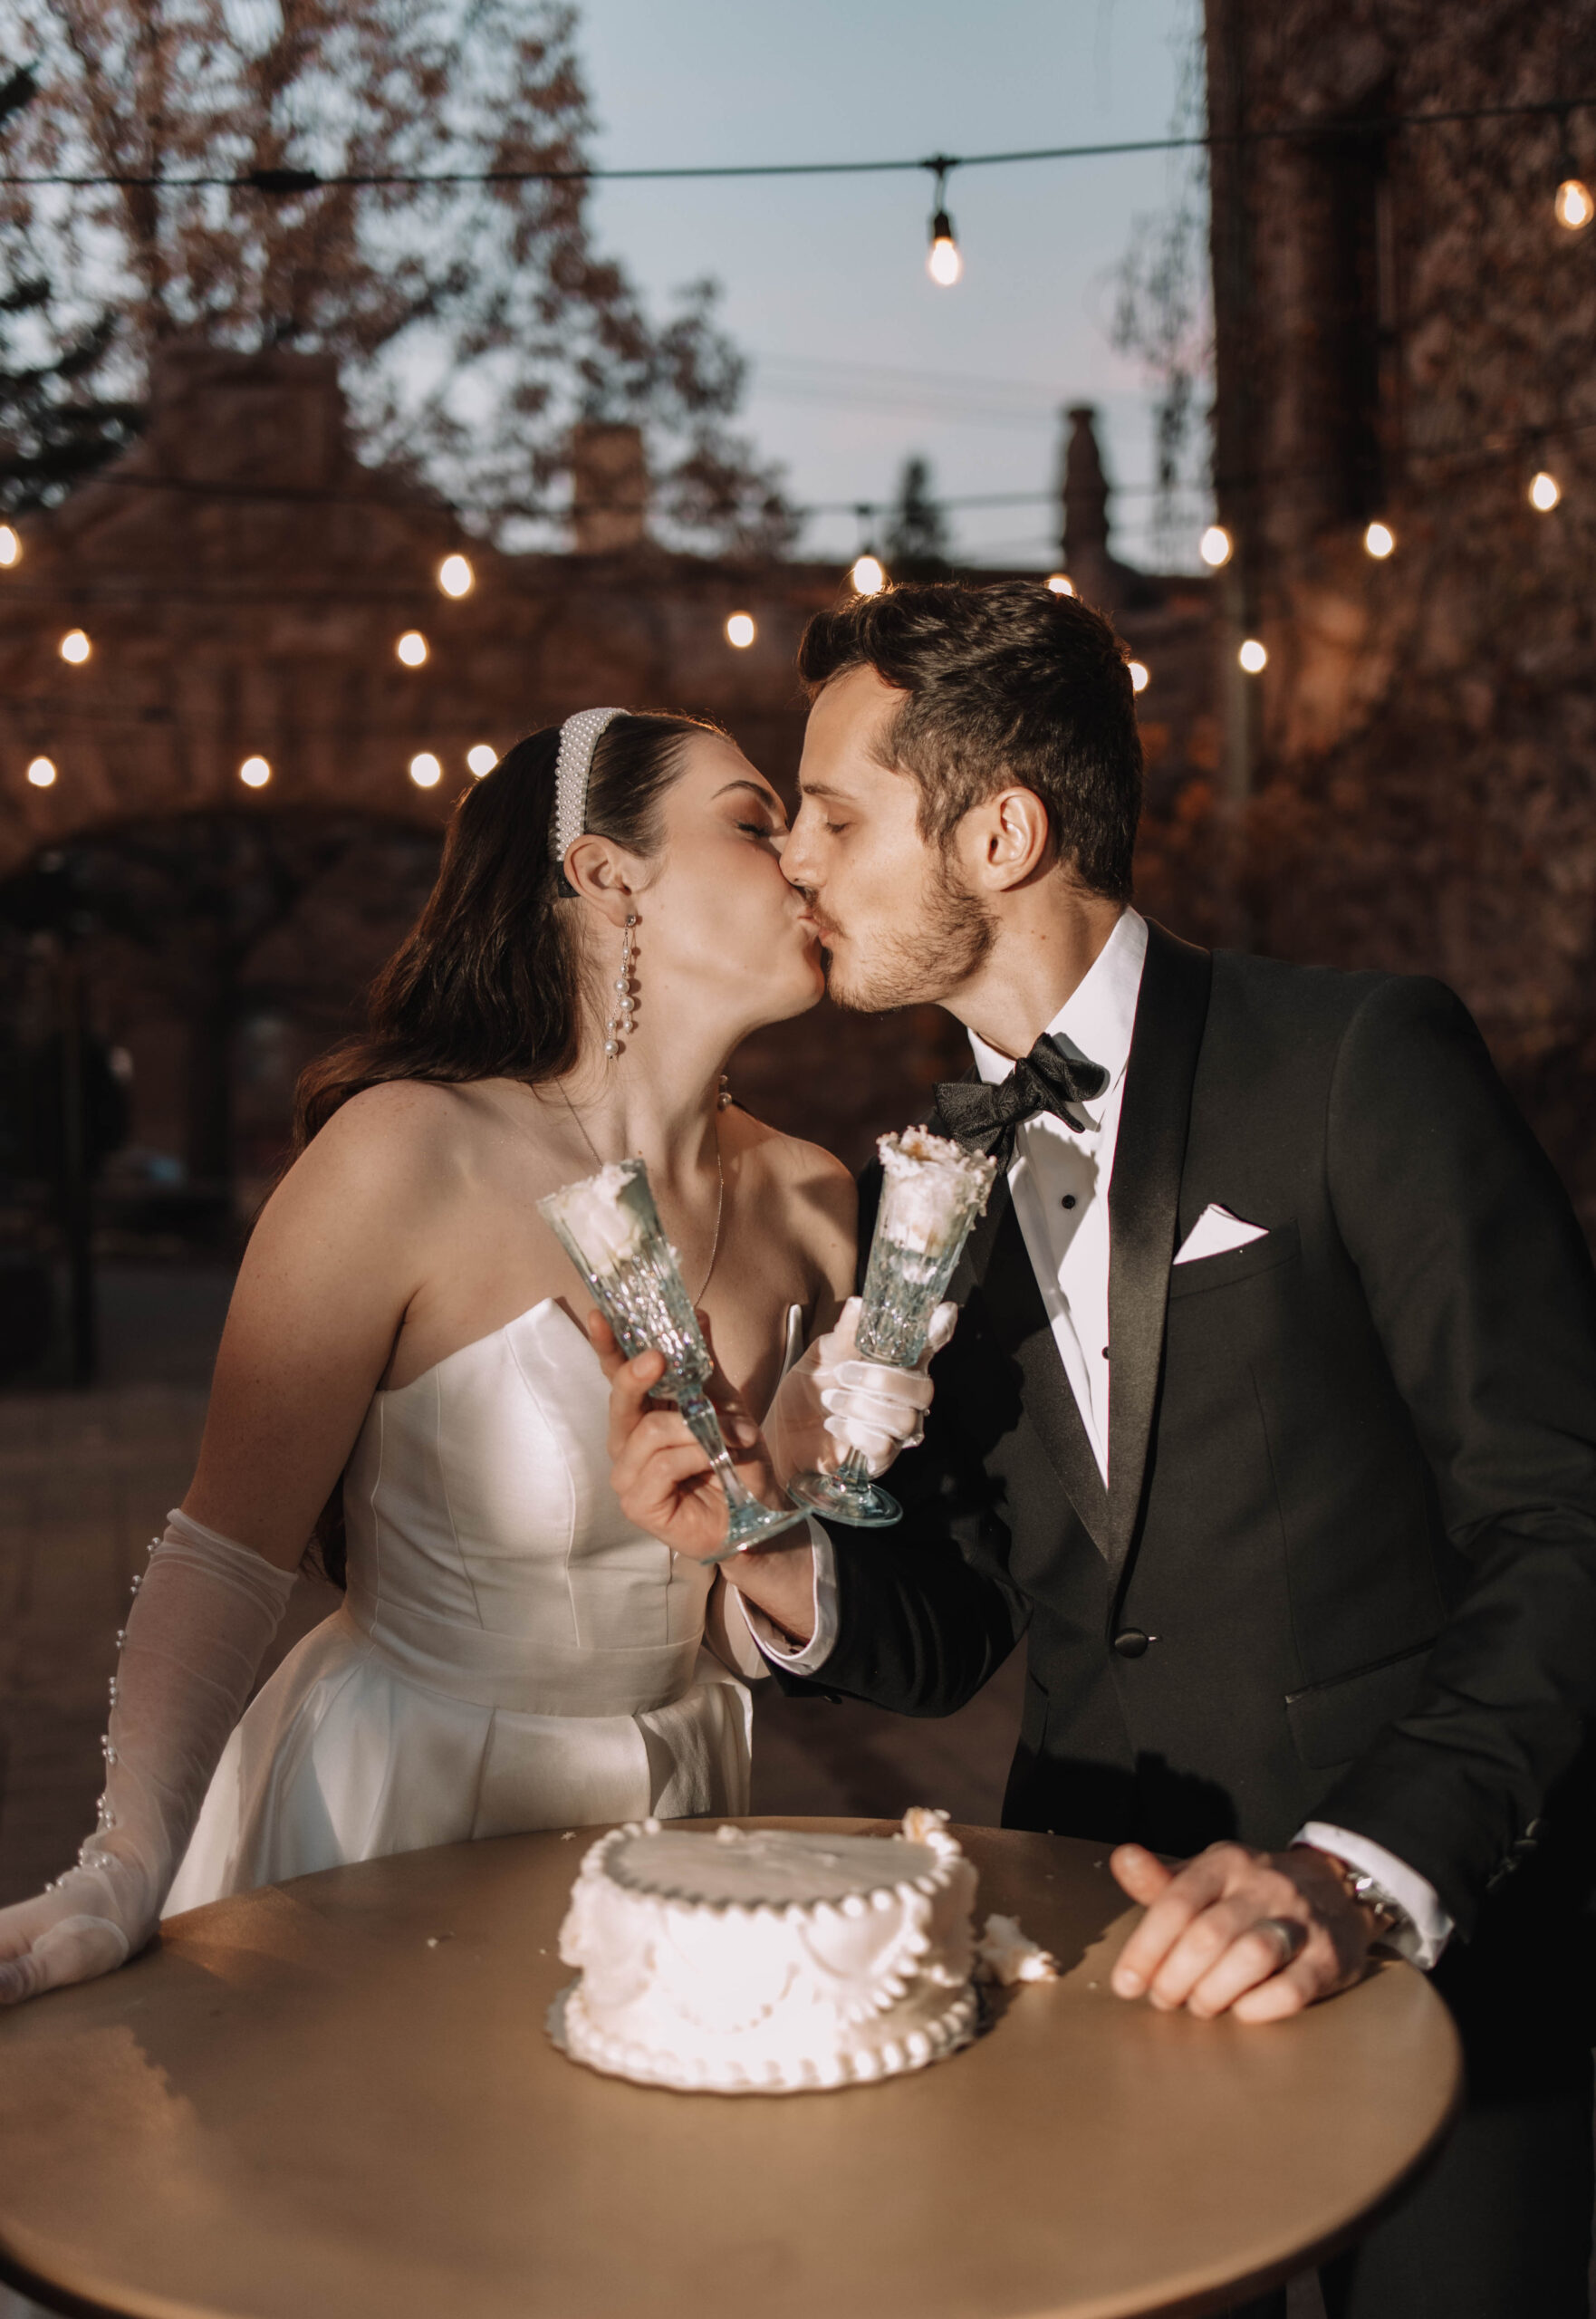 Flash photo of bride and groom kissing during their cake cutting on the back patio of a mansion. String lights are hanging behind them